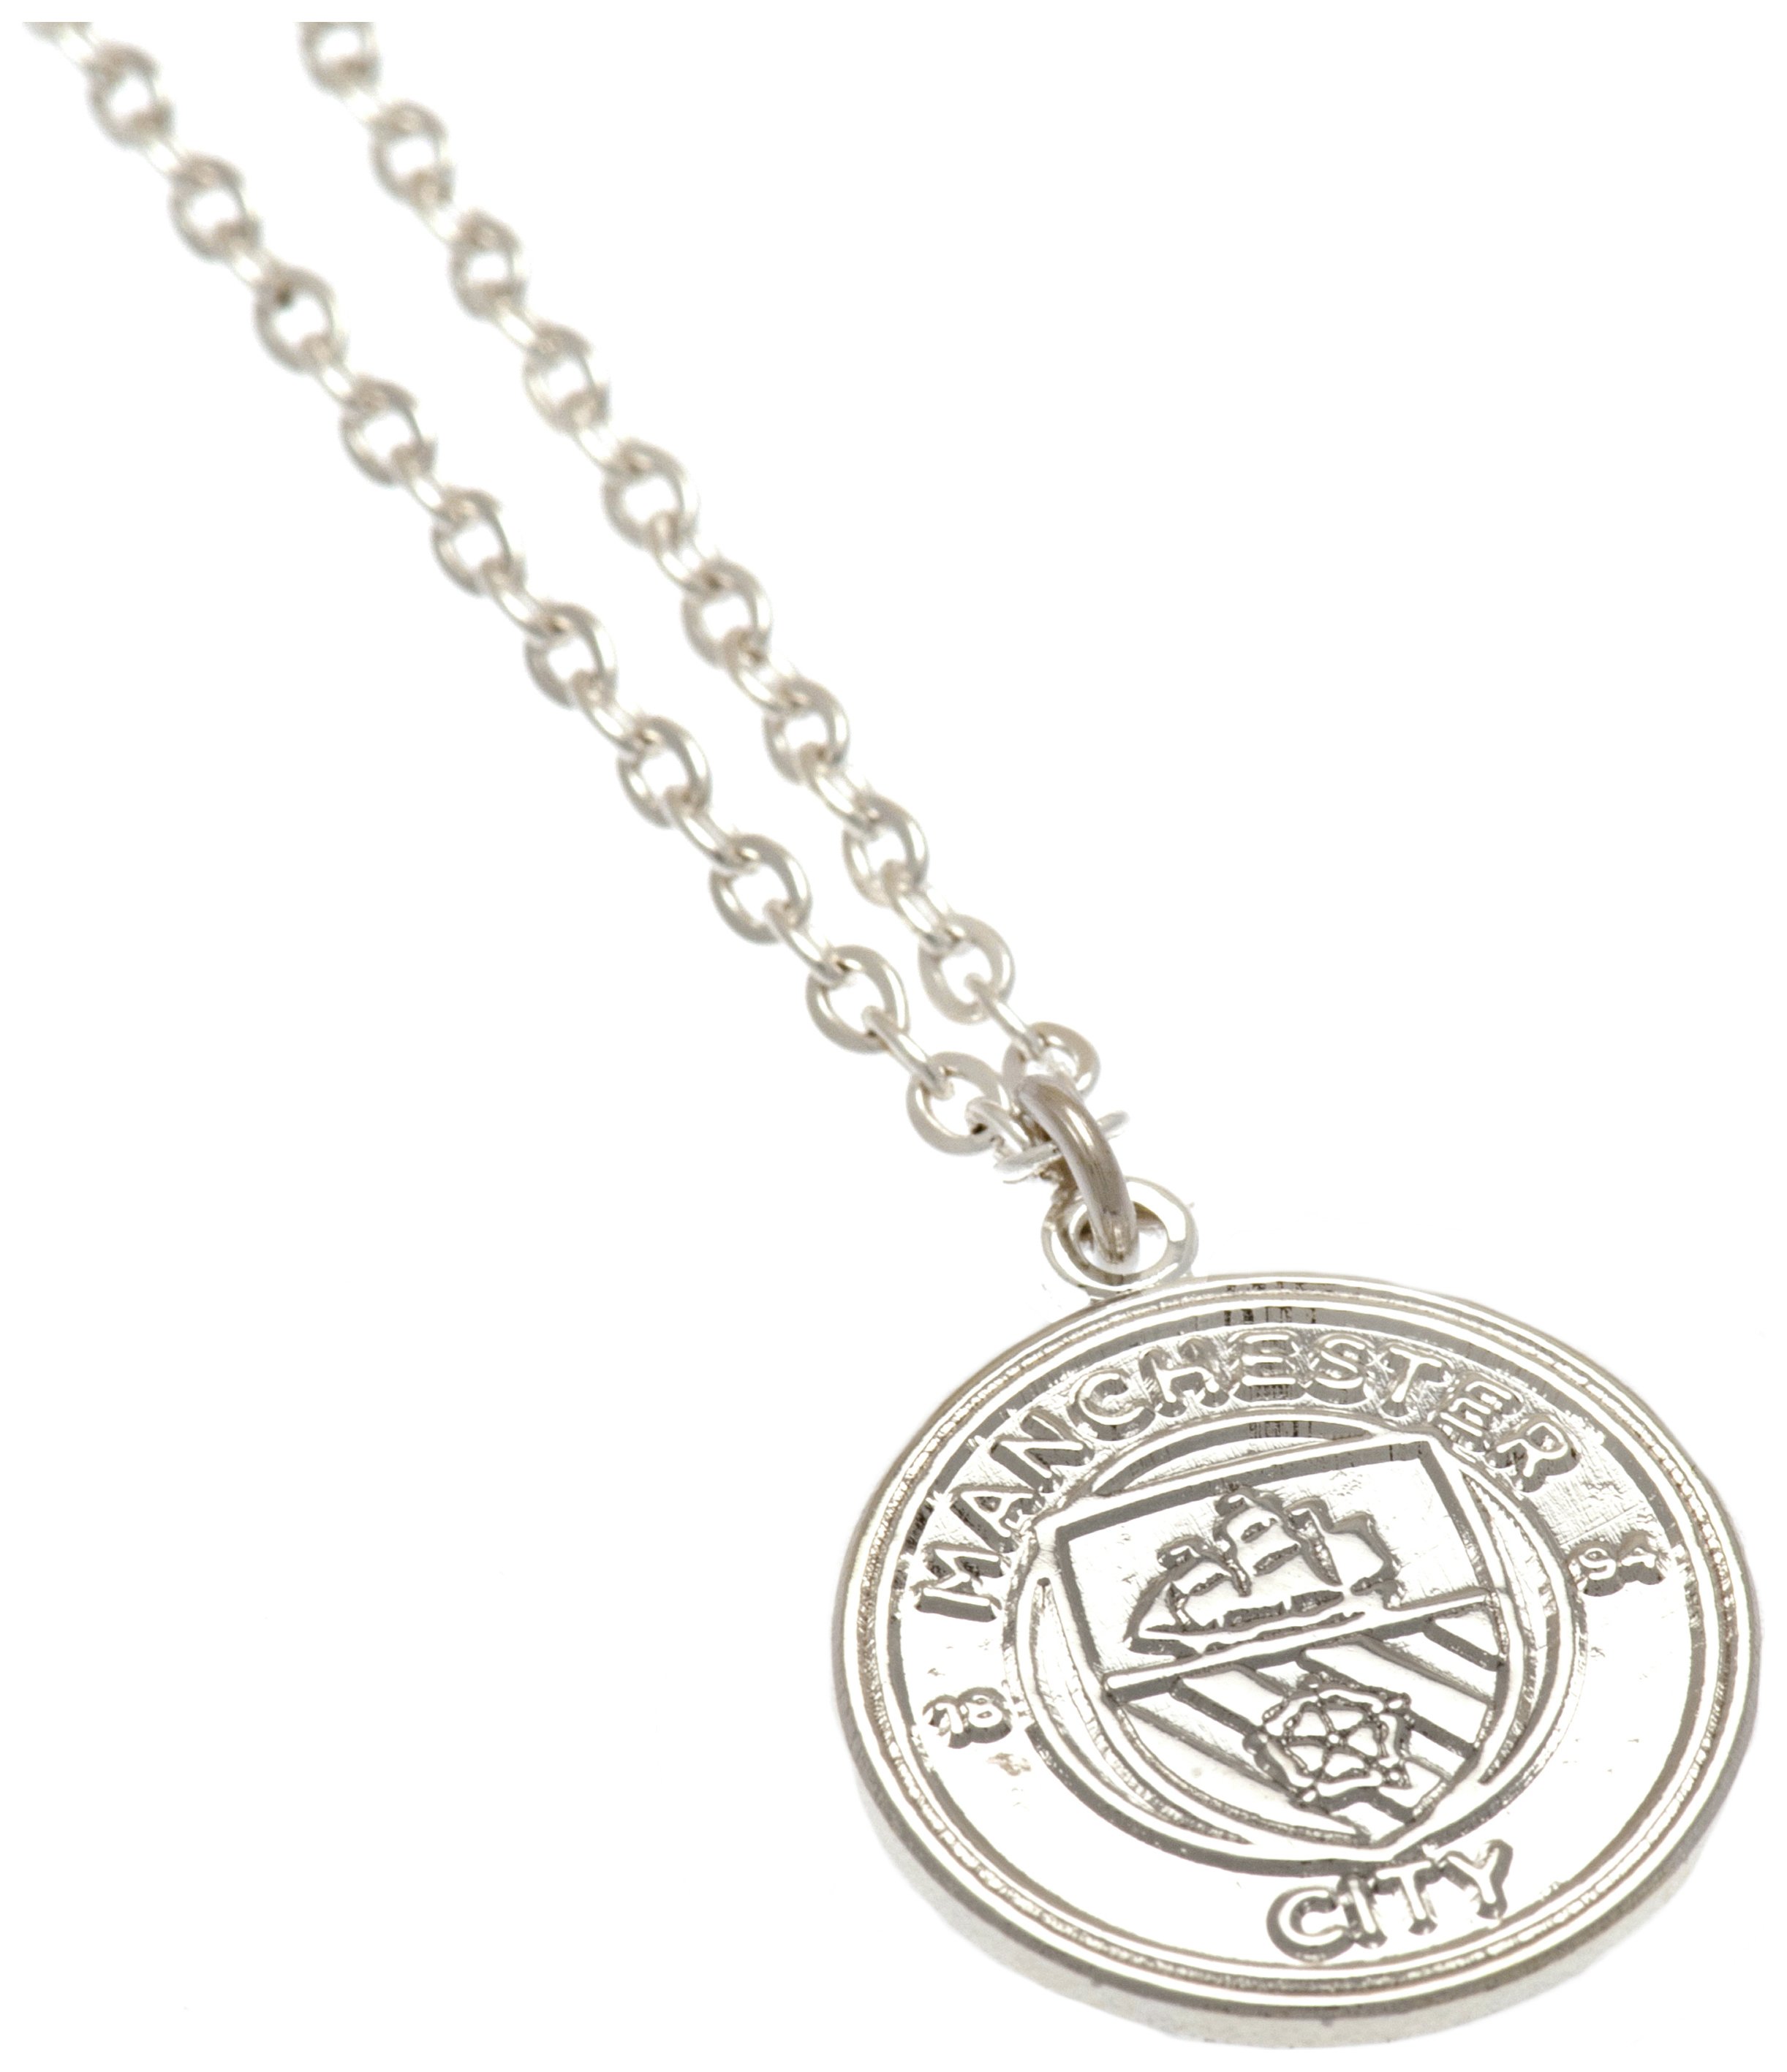 Silver Plated Man City Pendant and Chain